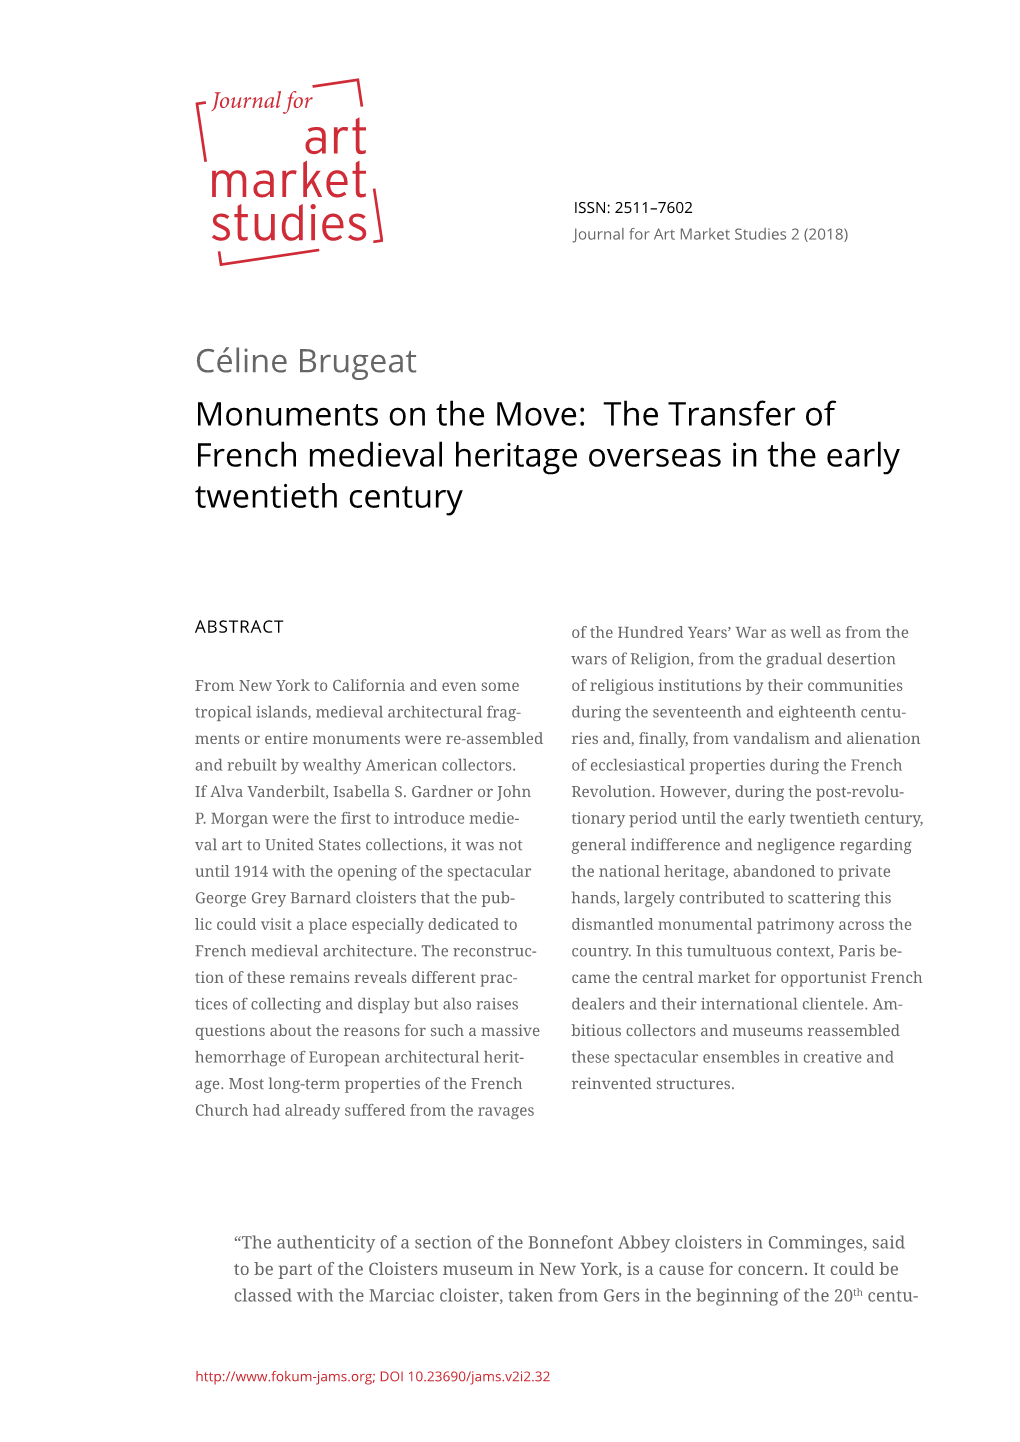 Céline Brugeat Monuments on the Move: the Transfer of French Medieval Heritage Overseas in the Early Twentieth Century